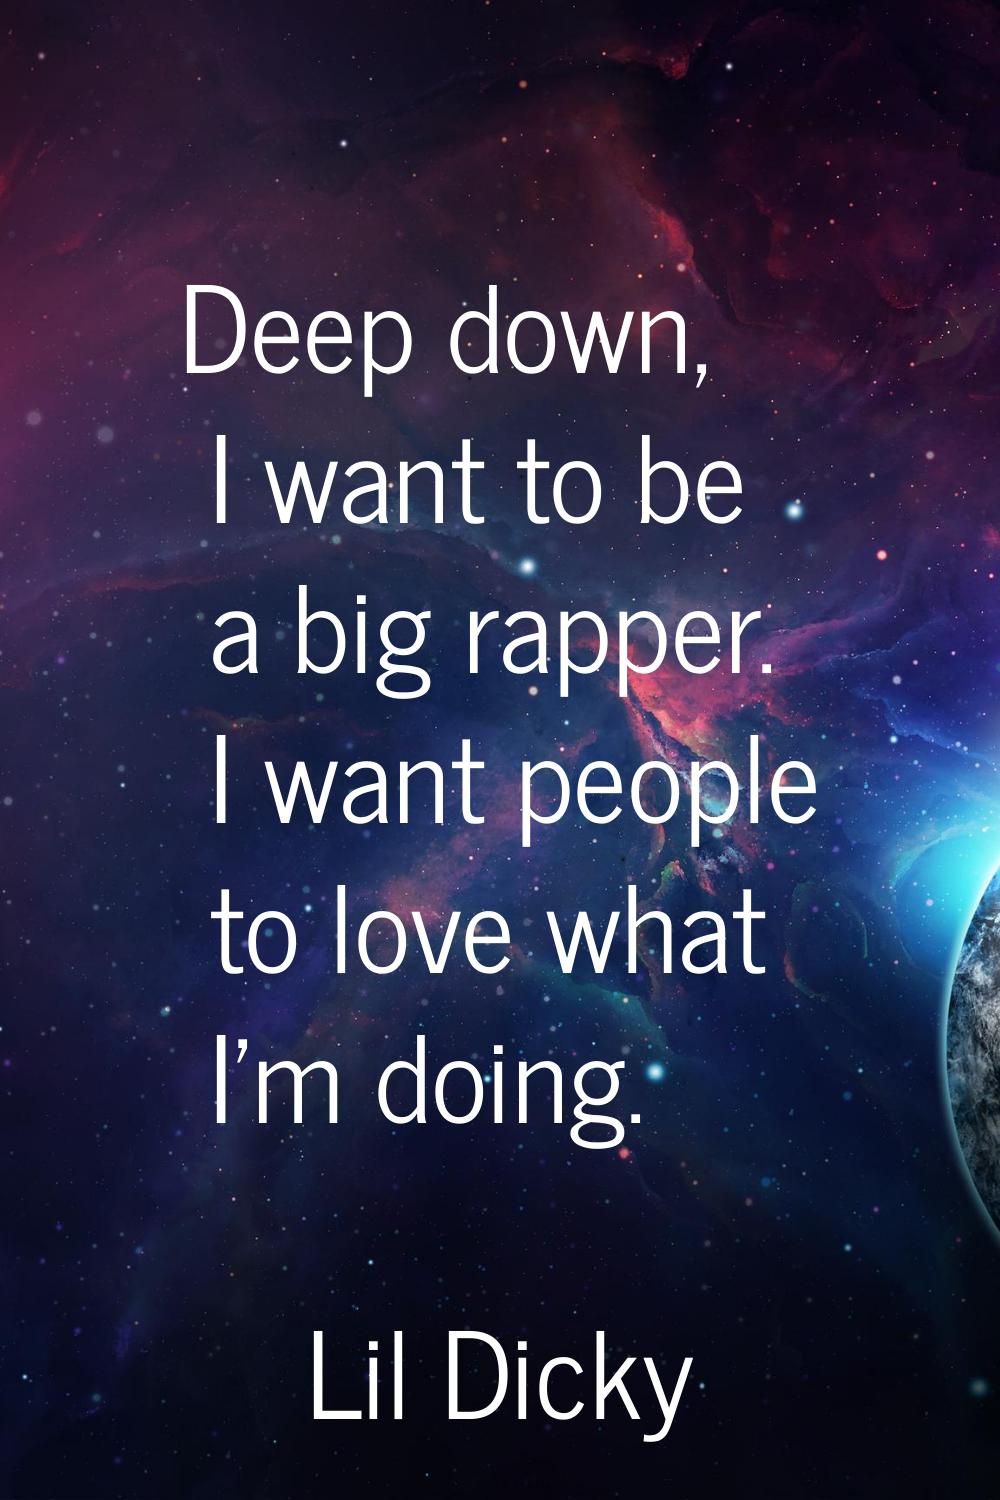 Deep down, I want to be a big rapper. I want people to love what I'm doing.